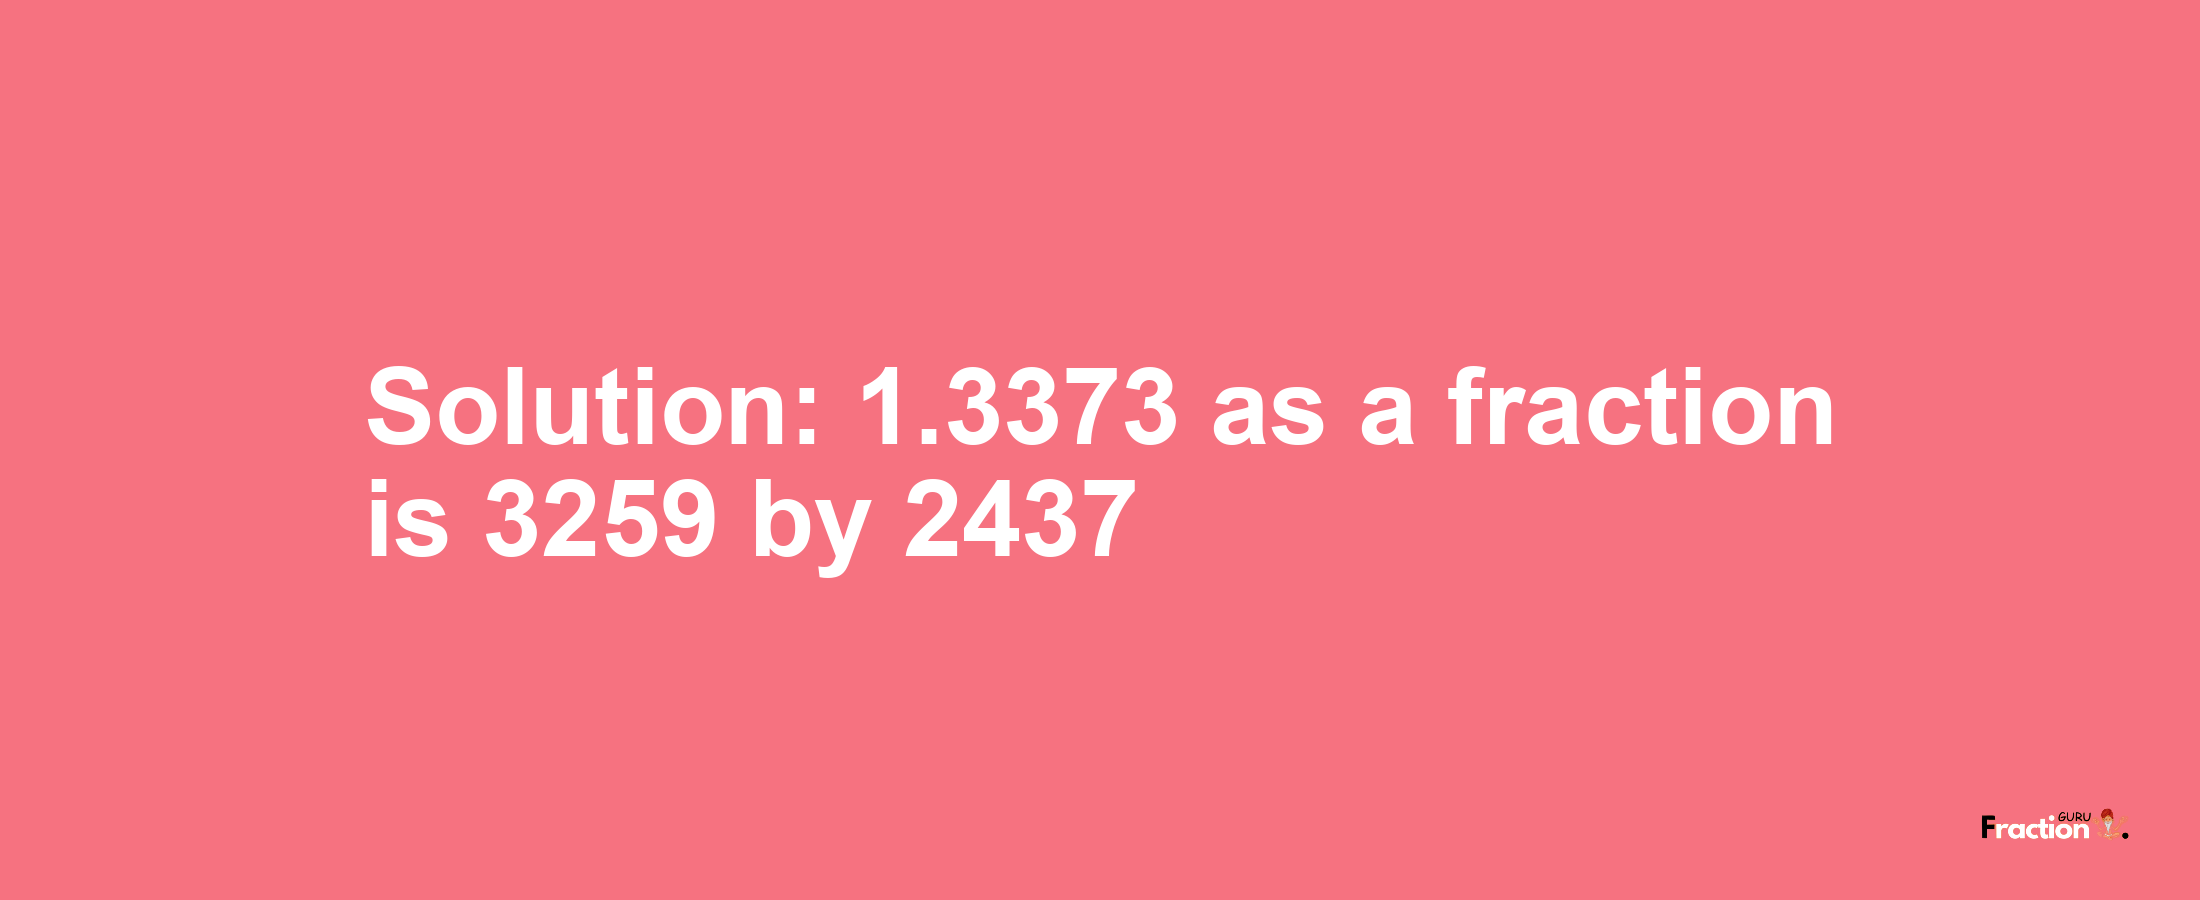 Solution:1.3373 as a fraction is 3259/2437